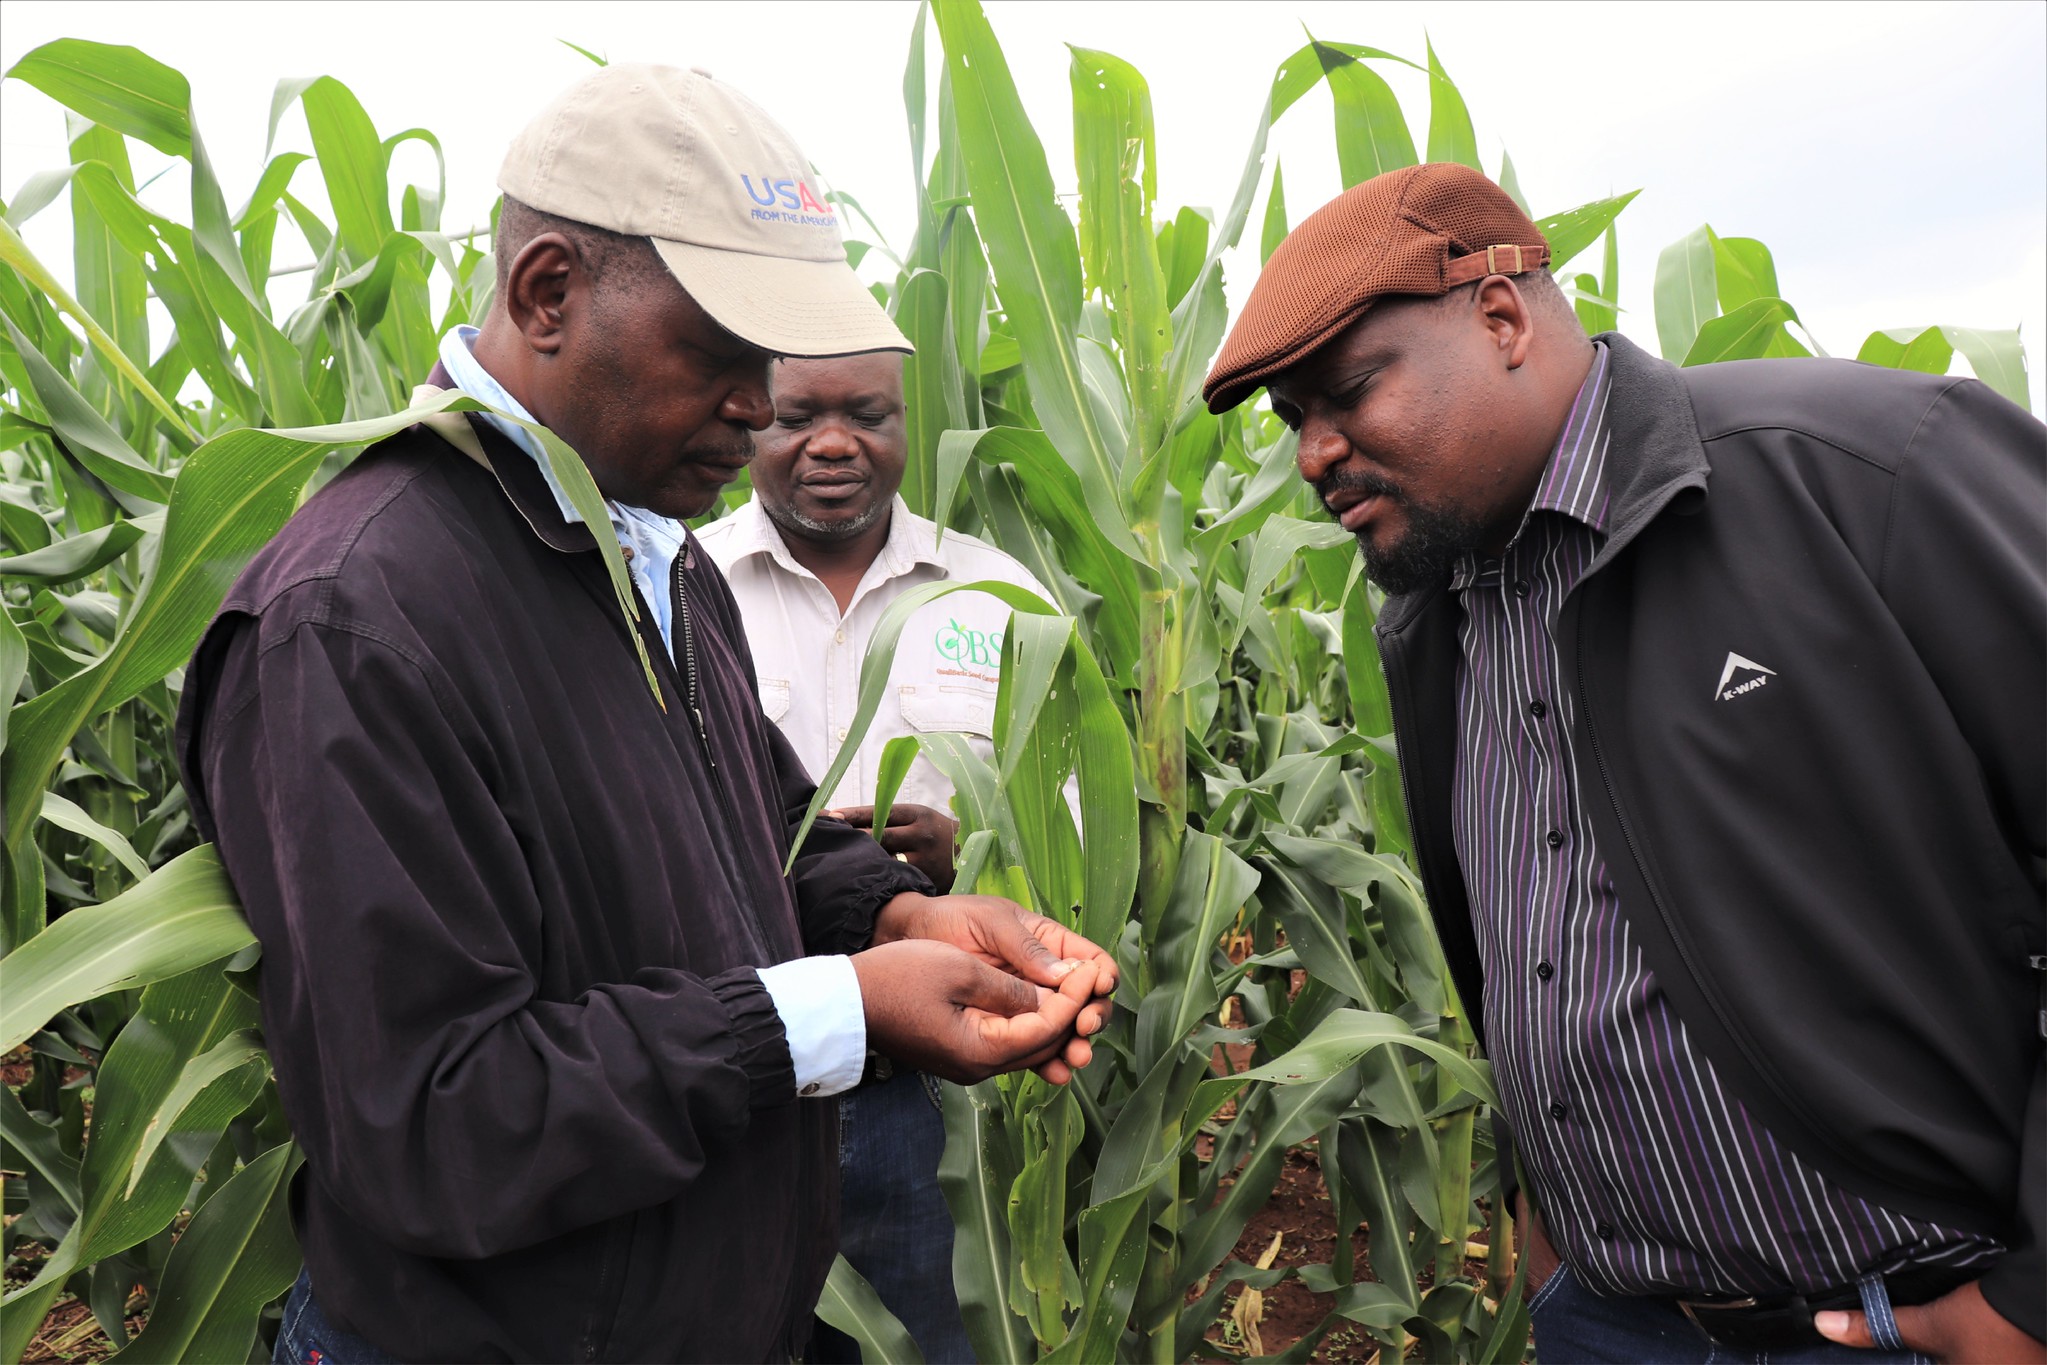 USAID worker examining maize seeds with local farmers in a maize field